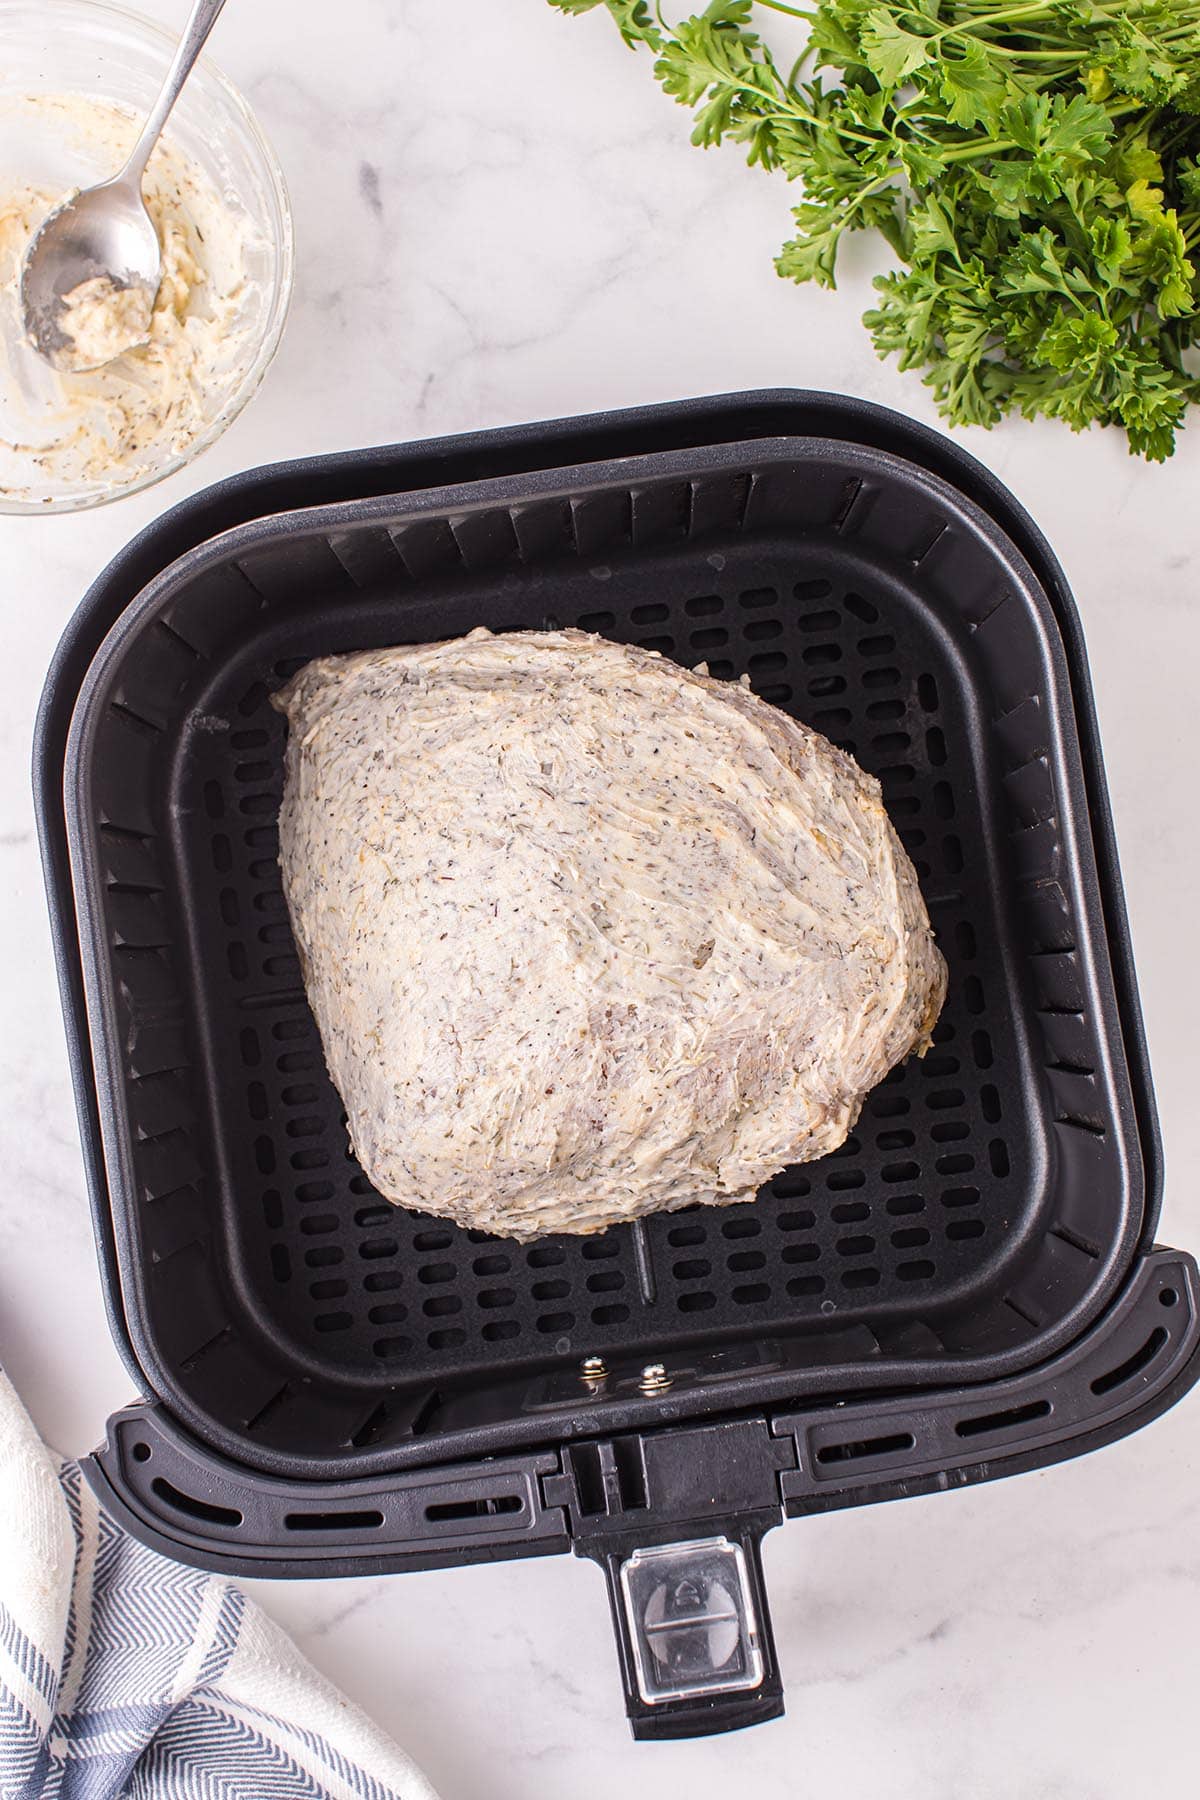 Generously coat the turkey breast with the seasoning mixture.